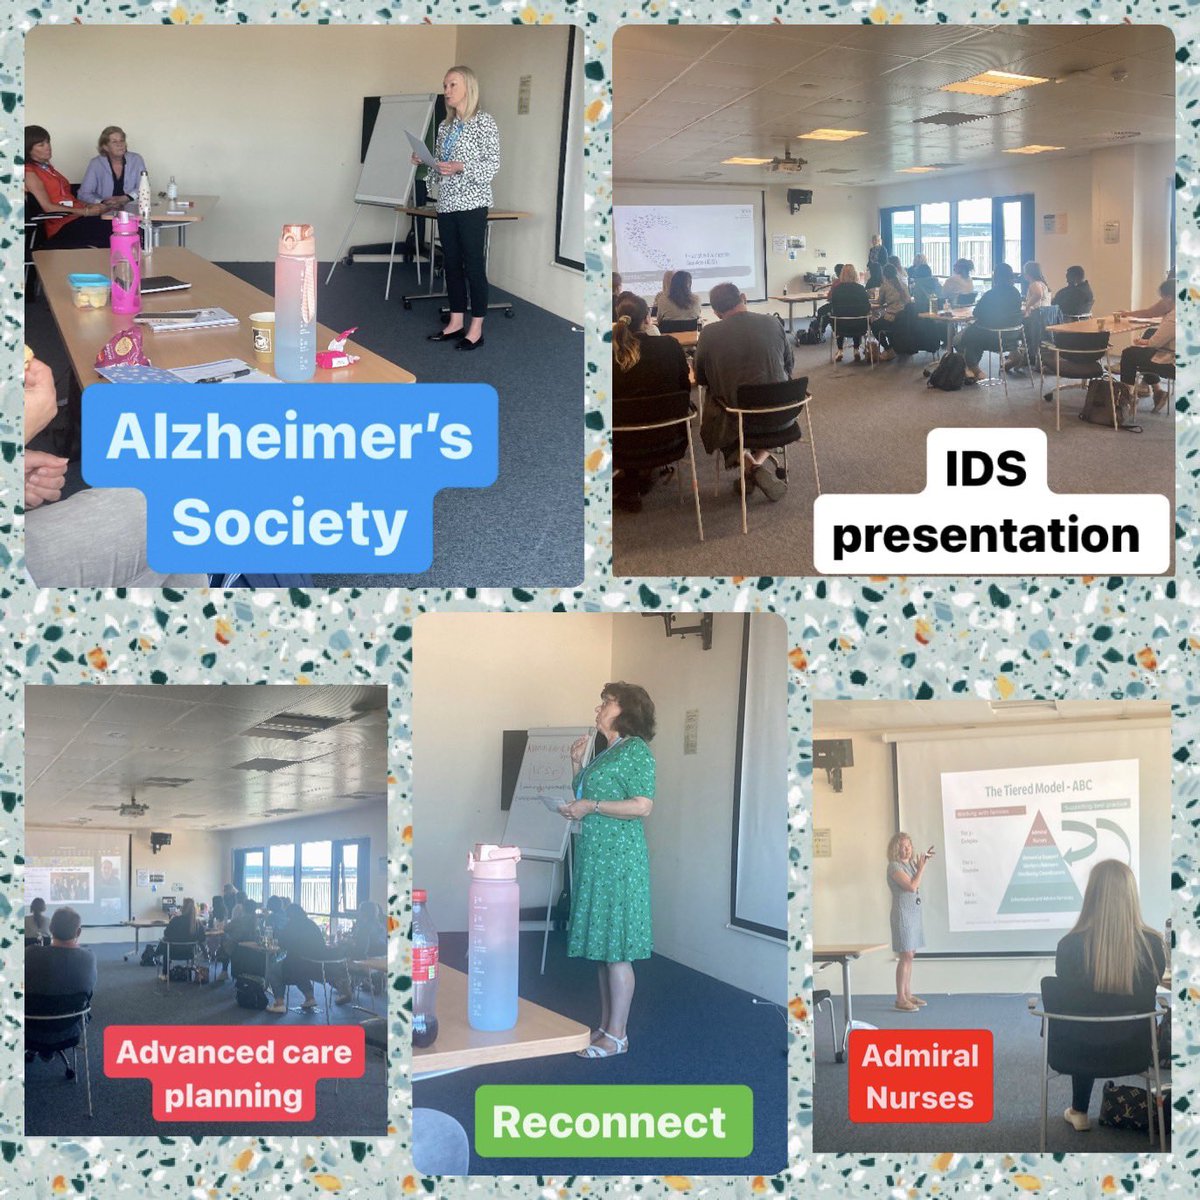 Study day 2 was a great success today welcoming a number of guest speakers to share their knowledge & experience. @SomersetFT @BeckyFurzer @Dementia_D_Team @alzheimerssoc @SomEOLC #education #dementia #livingwellwithdementia #learning